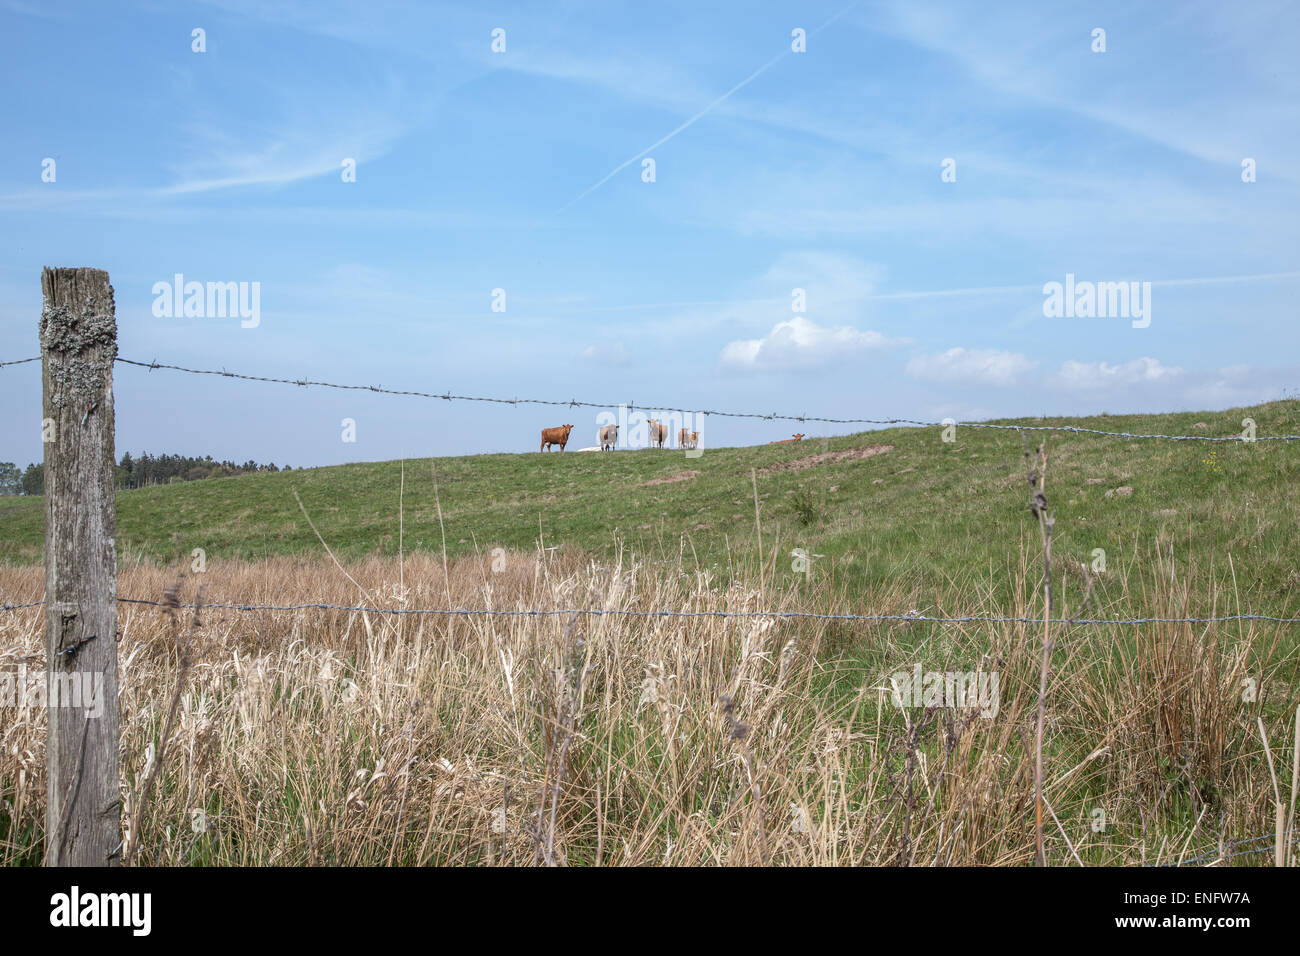 Caws on a hill far away and a fence in the foreground Stock Photo